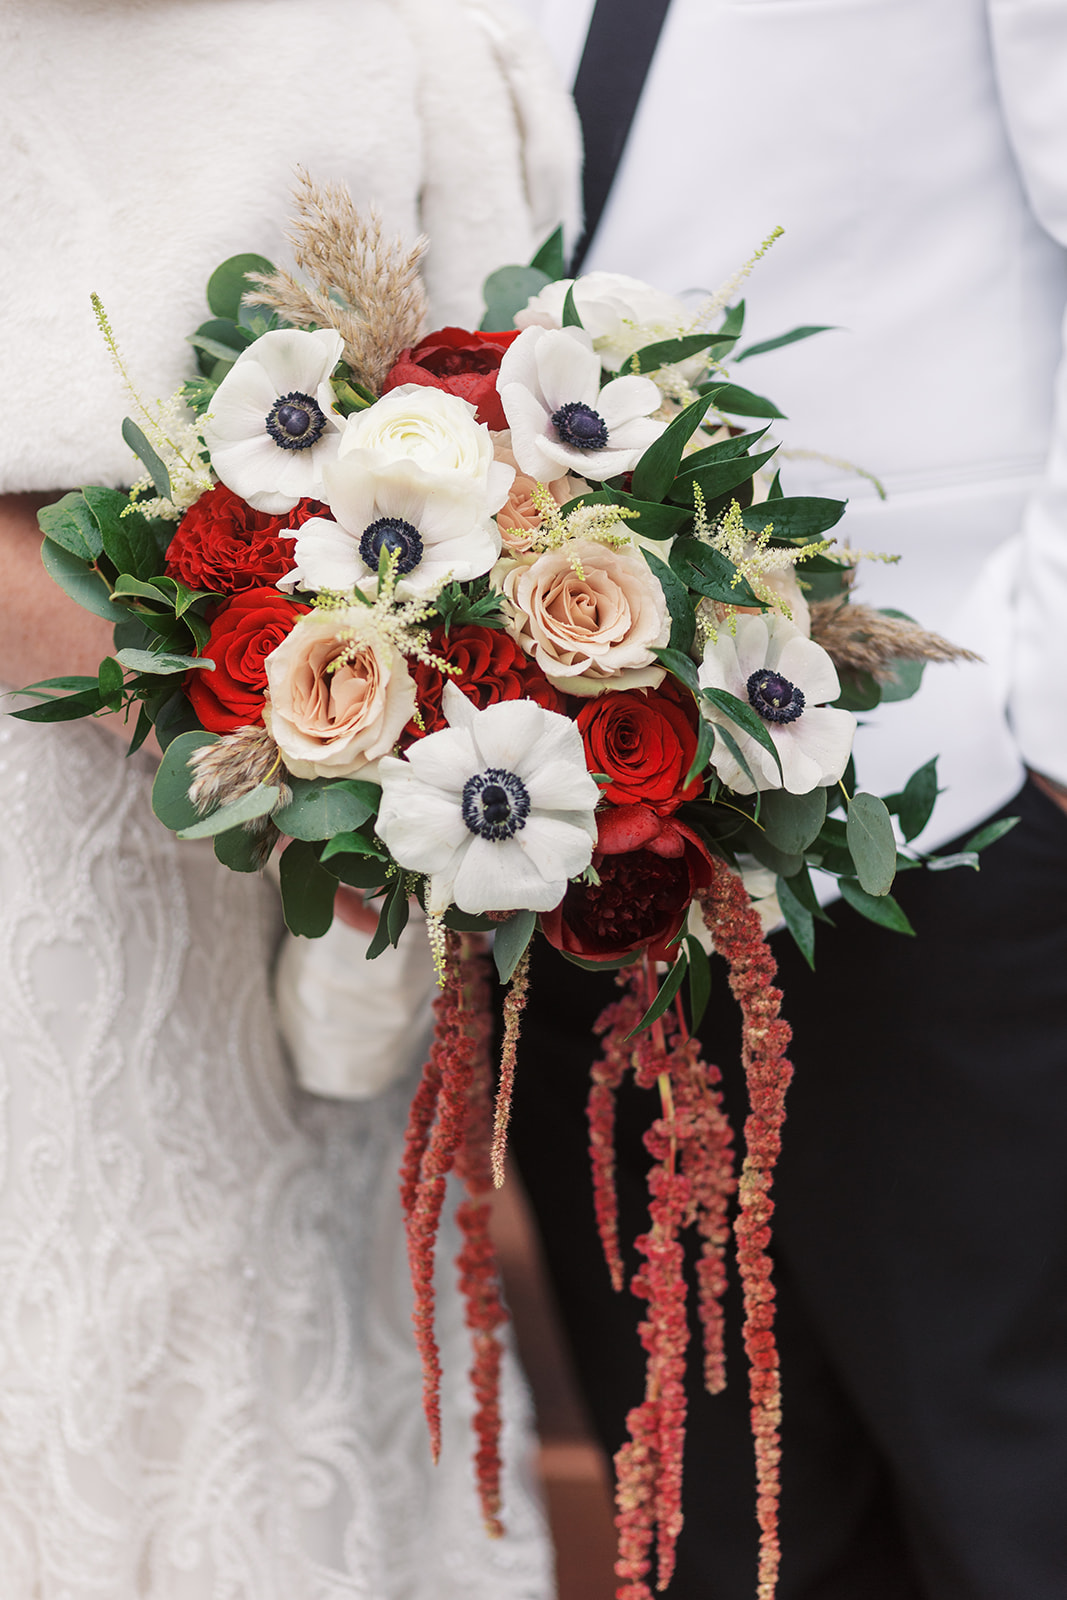 Details of a bridal bouquet with red and white flowers